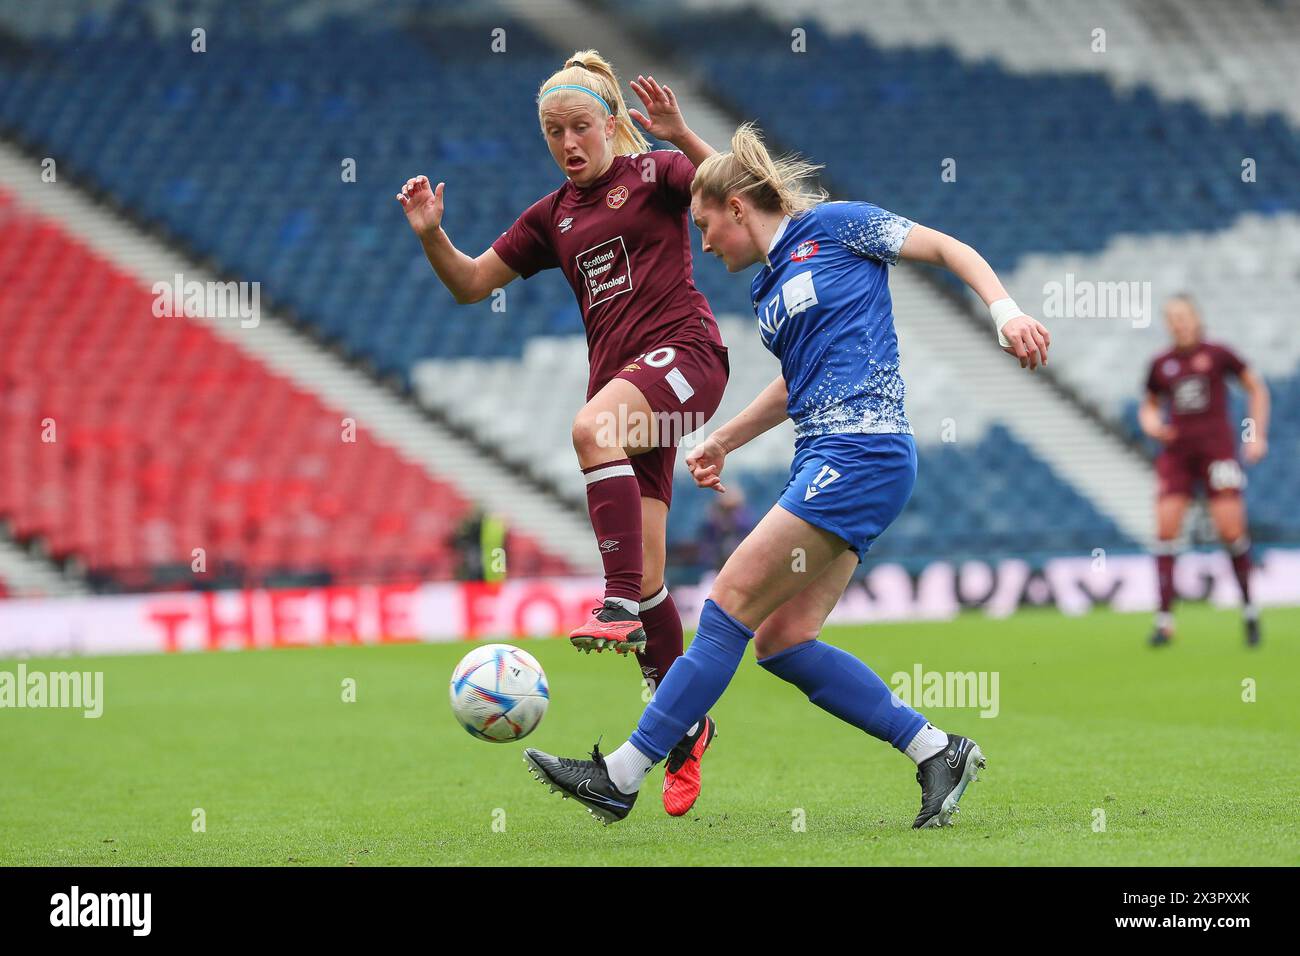 Glasgow, UK. 28th Apr, 2024. Spartans play Heart of Midlothian at Hampden park, Glasgow, Scotland, UK in the semi-final of the Women's Scottish Cup. The winner of this match will play Rangers in the final on Saturday 25 May at Hampden Park. Credit: Findlay/Alamy Live News Stock Photo